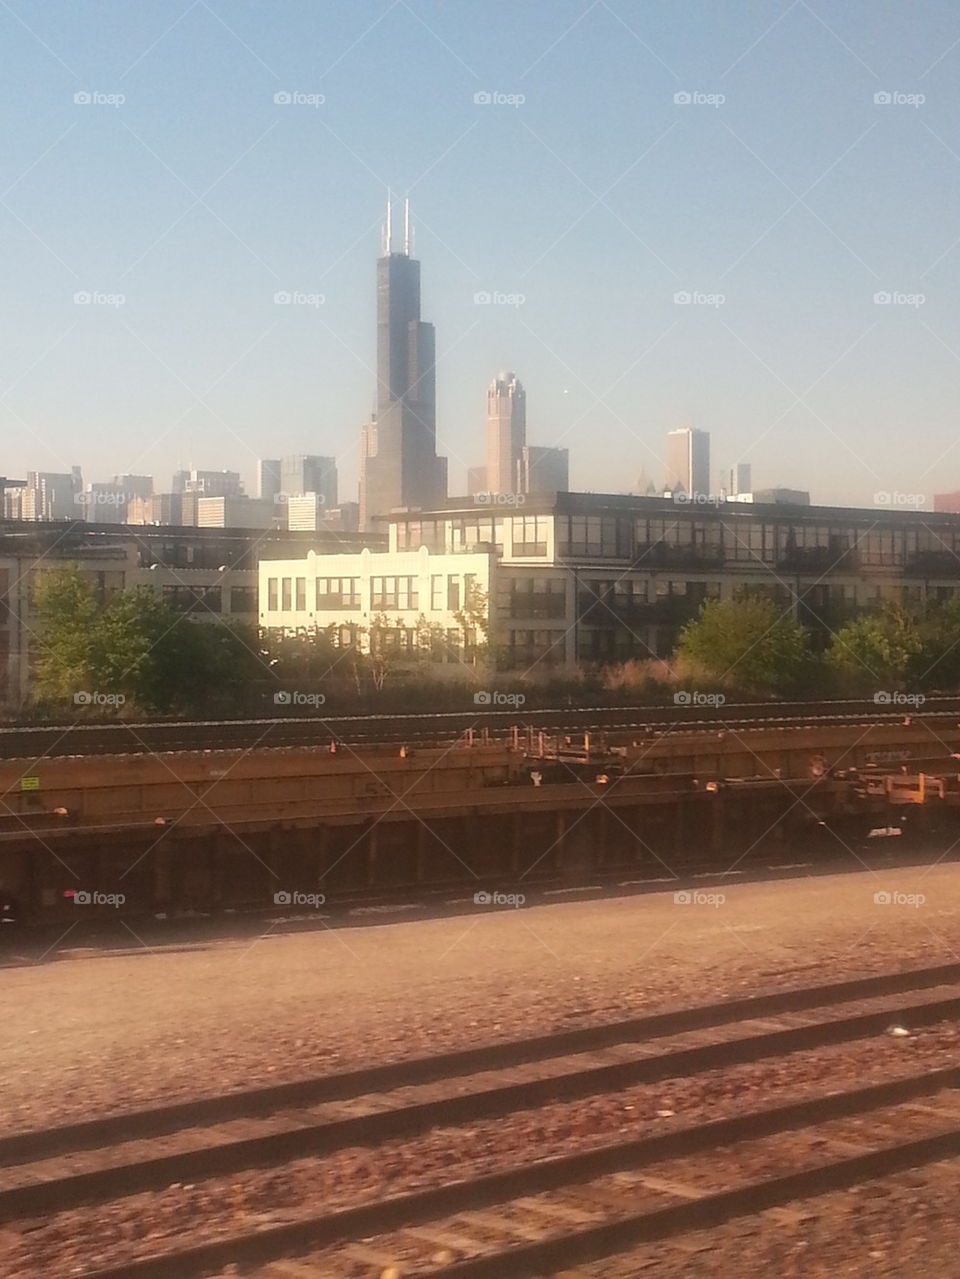 Chicago from the railway